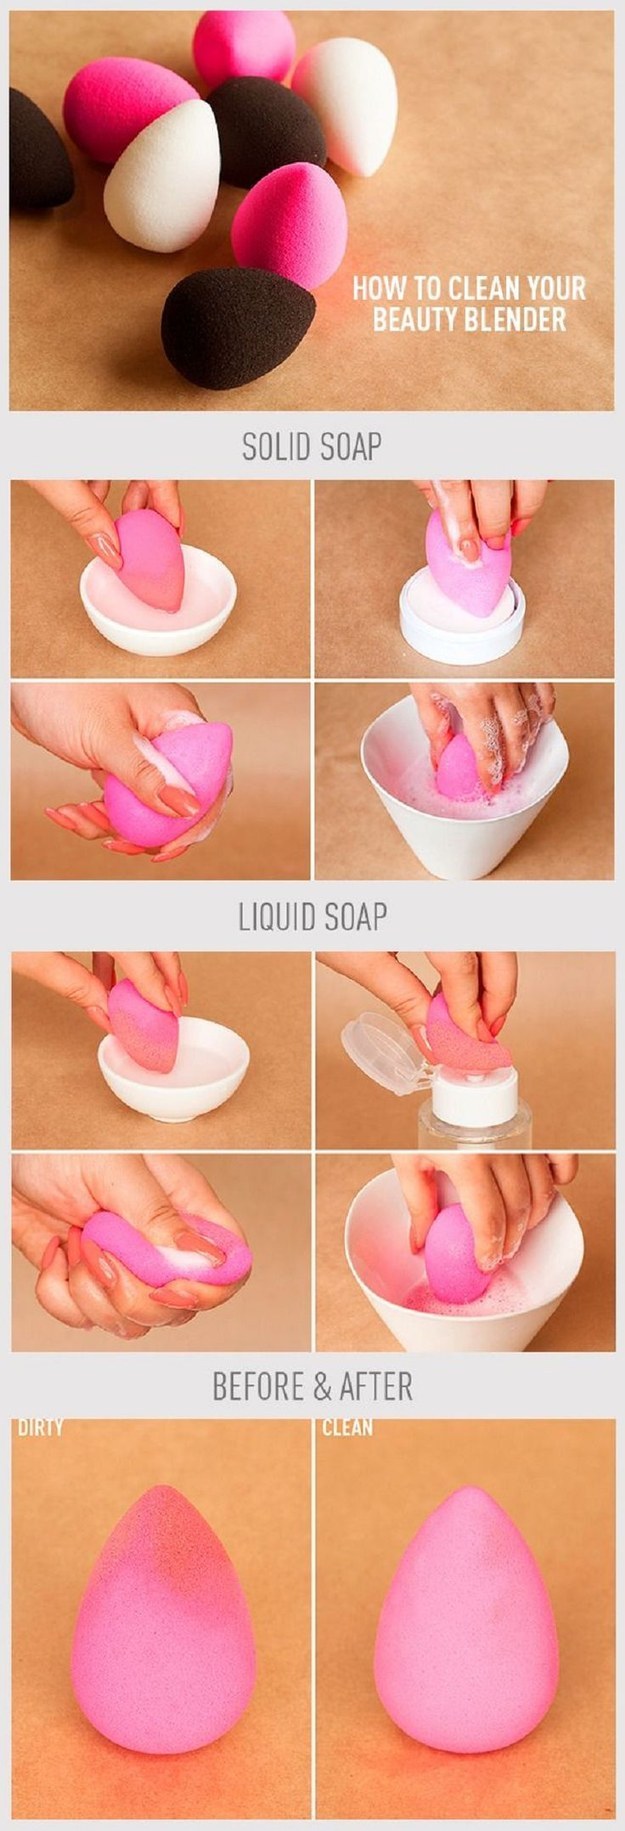 Beauty Blender Cleaning